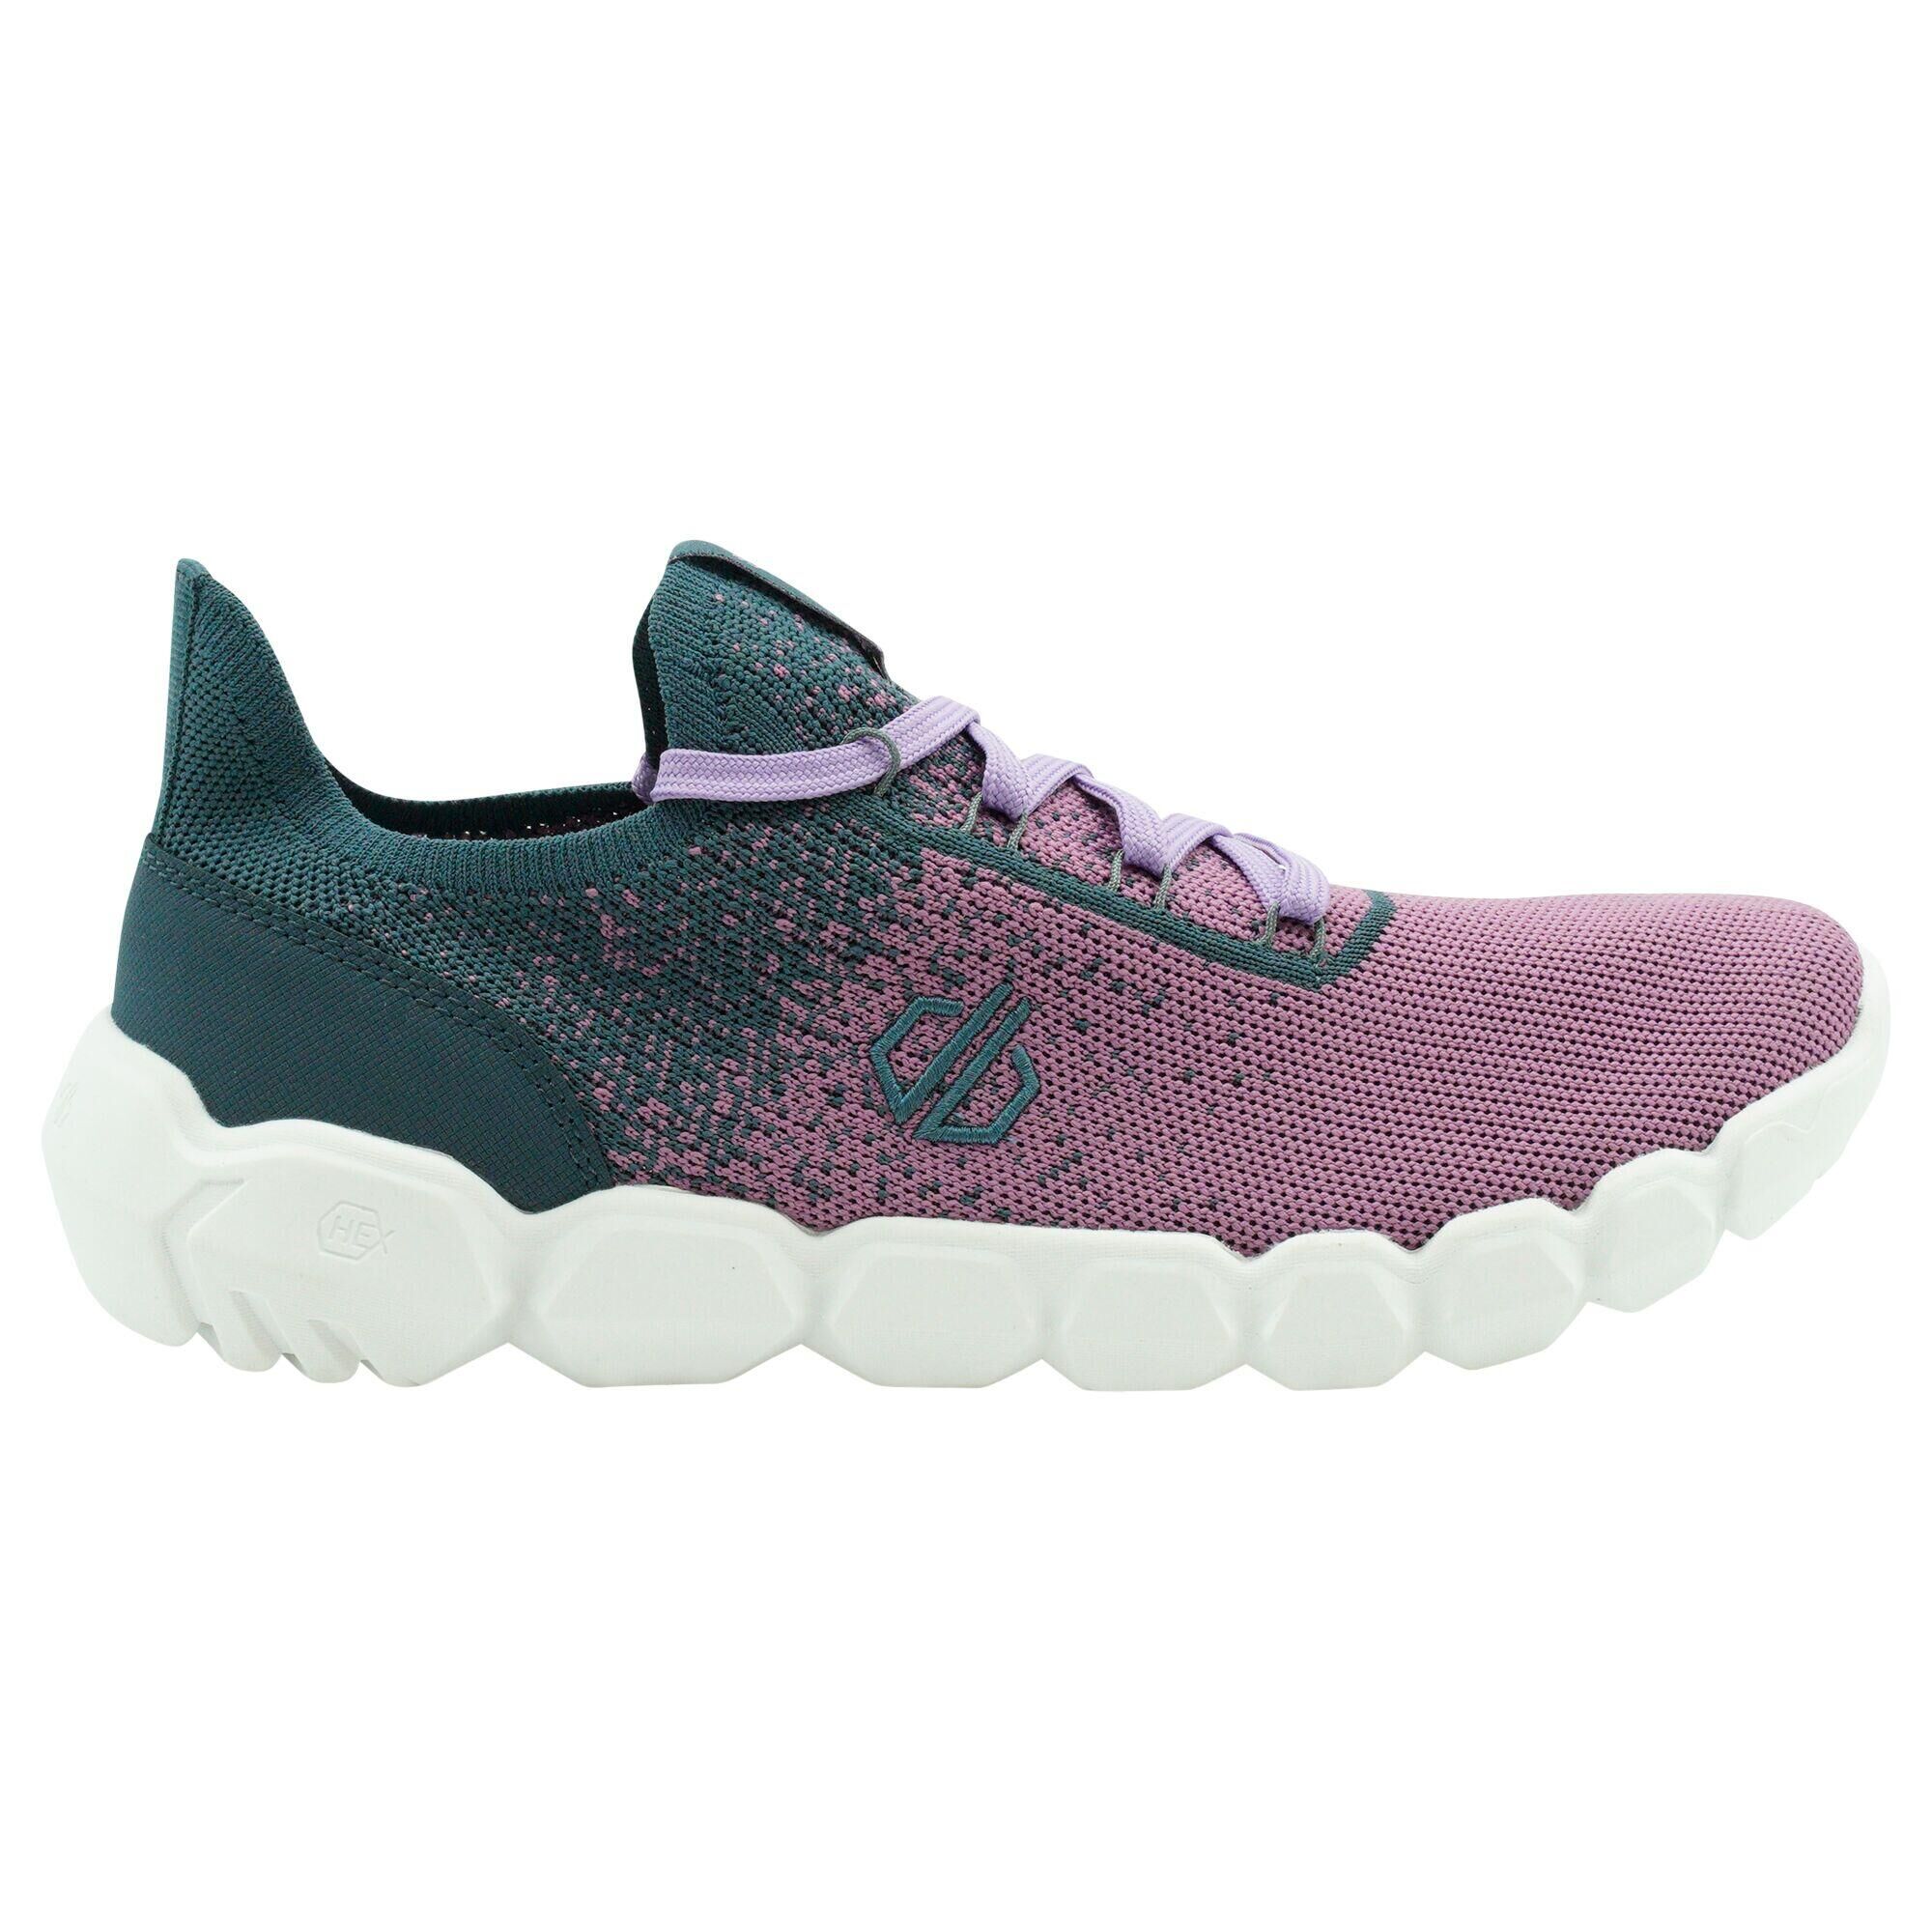 DARE 2B Women's Hex-At Recycled Knit Trainers